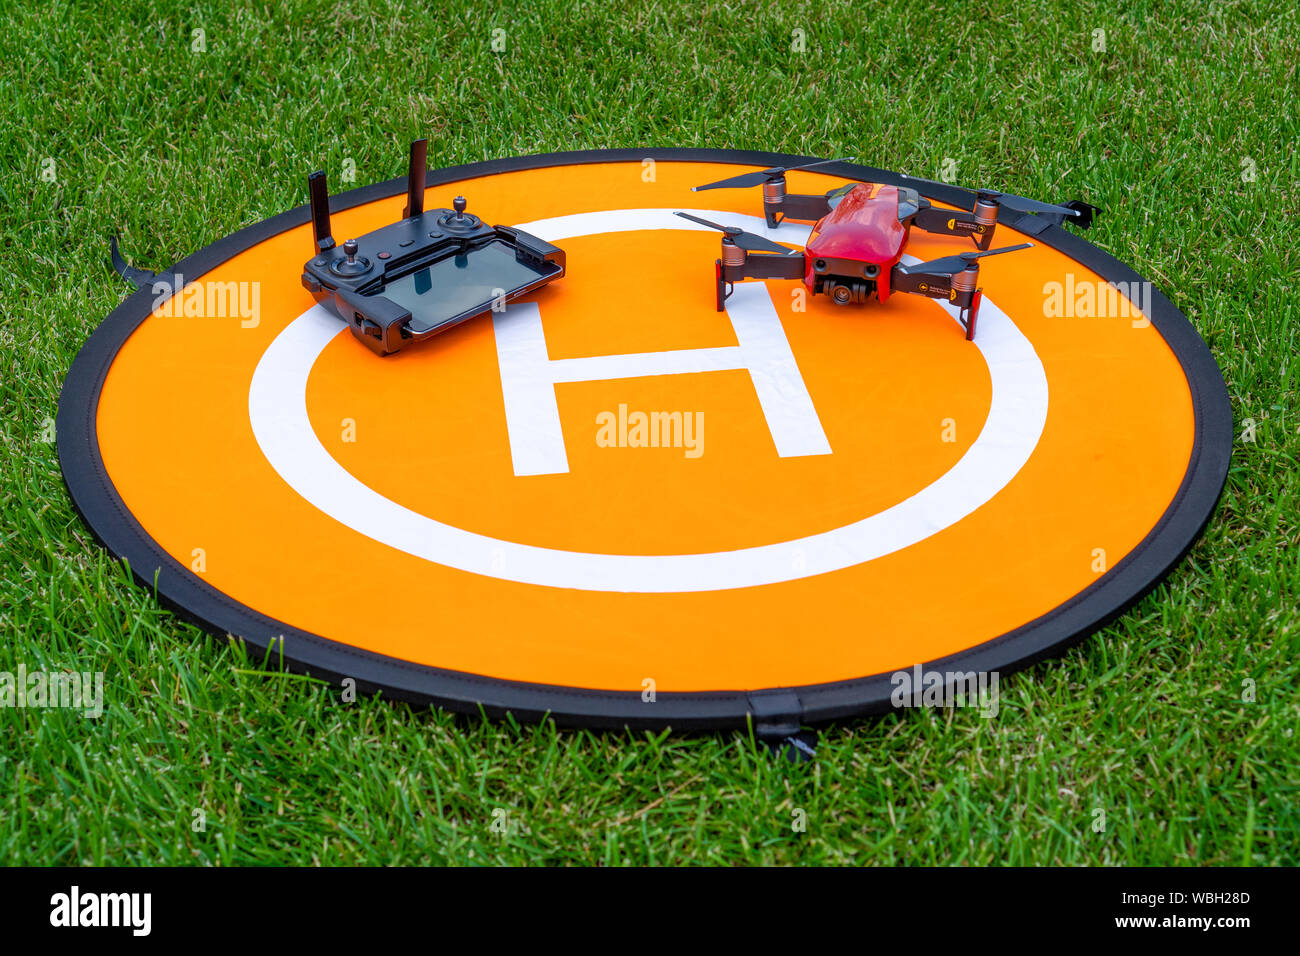 Russia, Tatarstan, June 15, 2019. Drone on the heliport. drone phone and  control panel on an orange helipad on the grass Stock Photo - Alamy